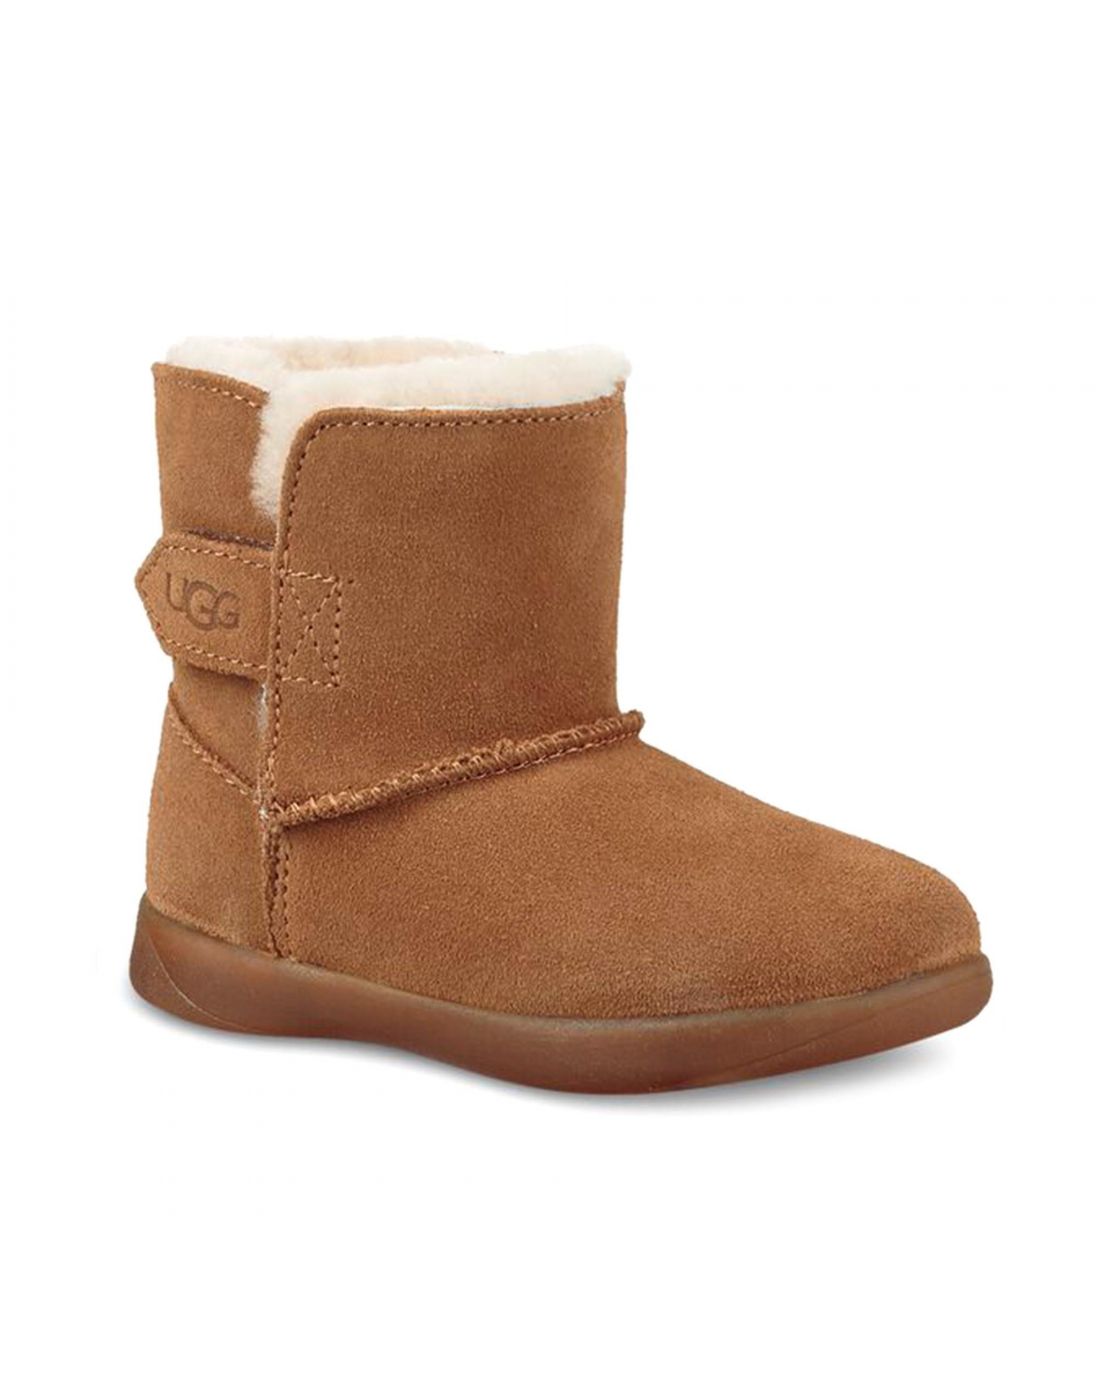 Ugg Boys Leather Boots | LAPIN KIDS